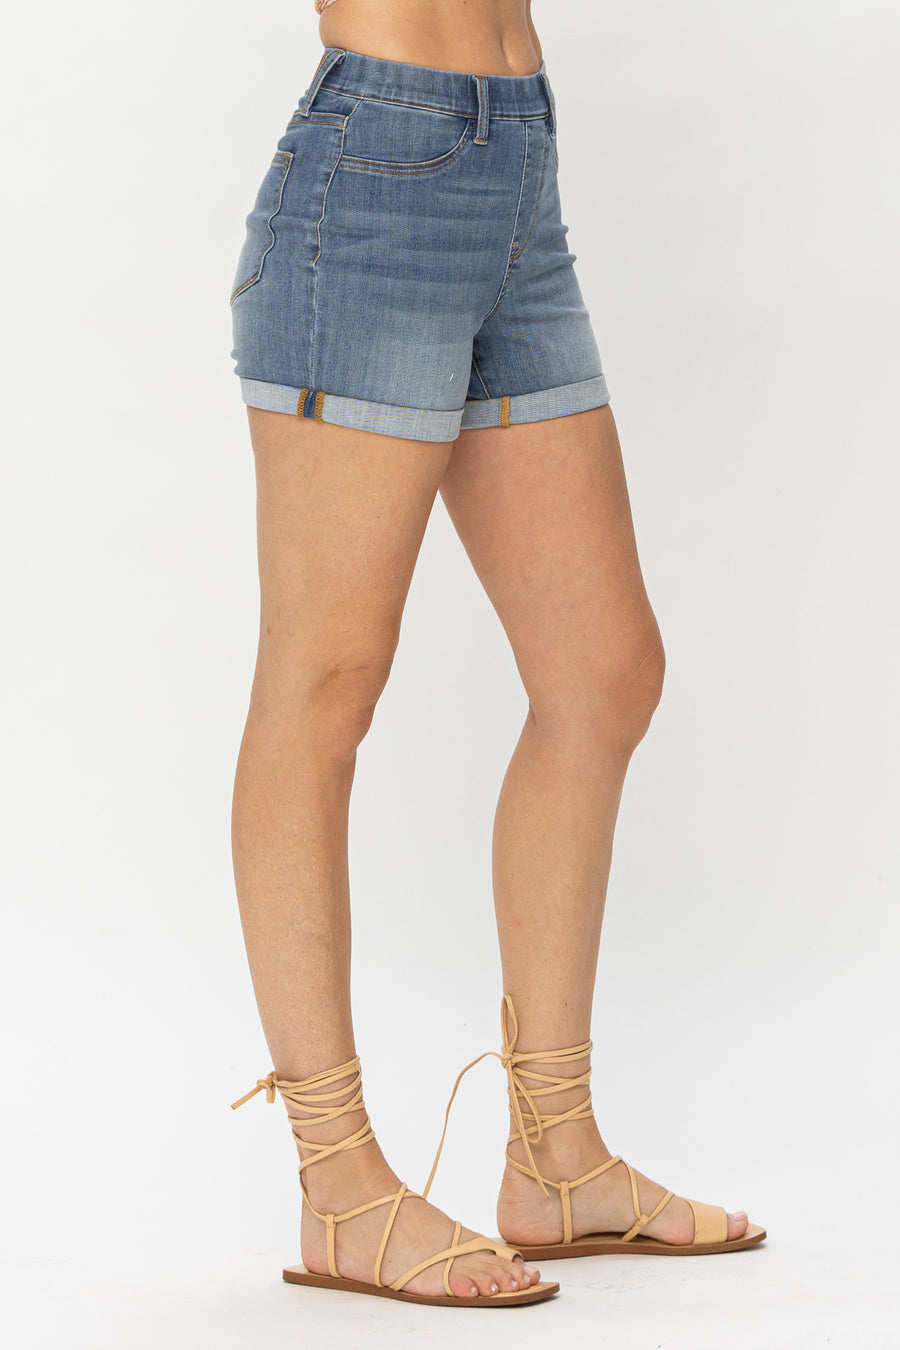 Norma Pull-On Cuffed Shorts - PLUS